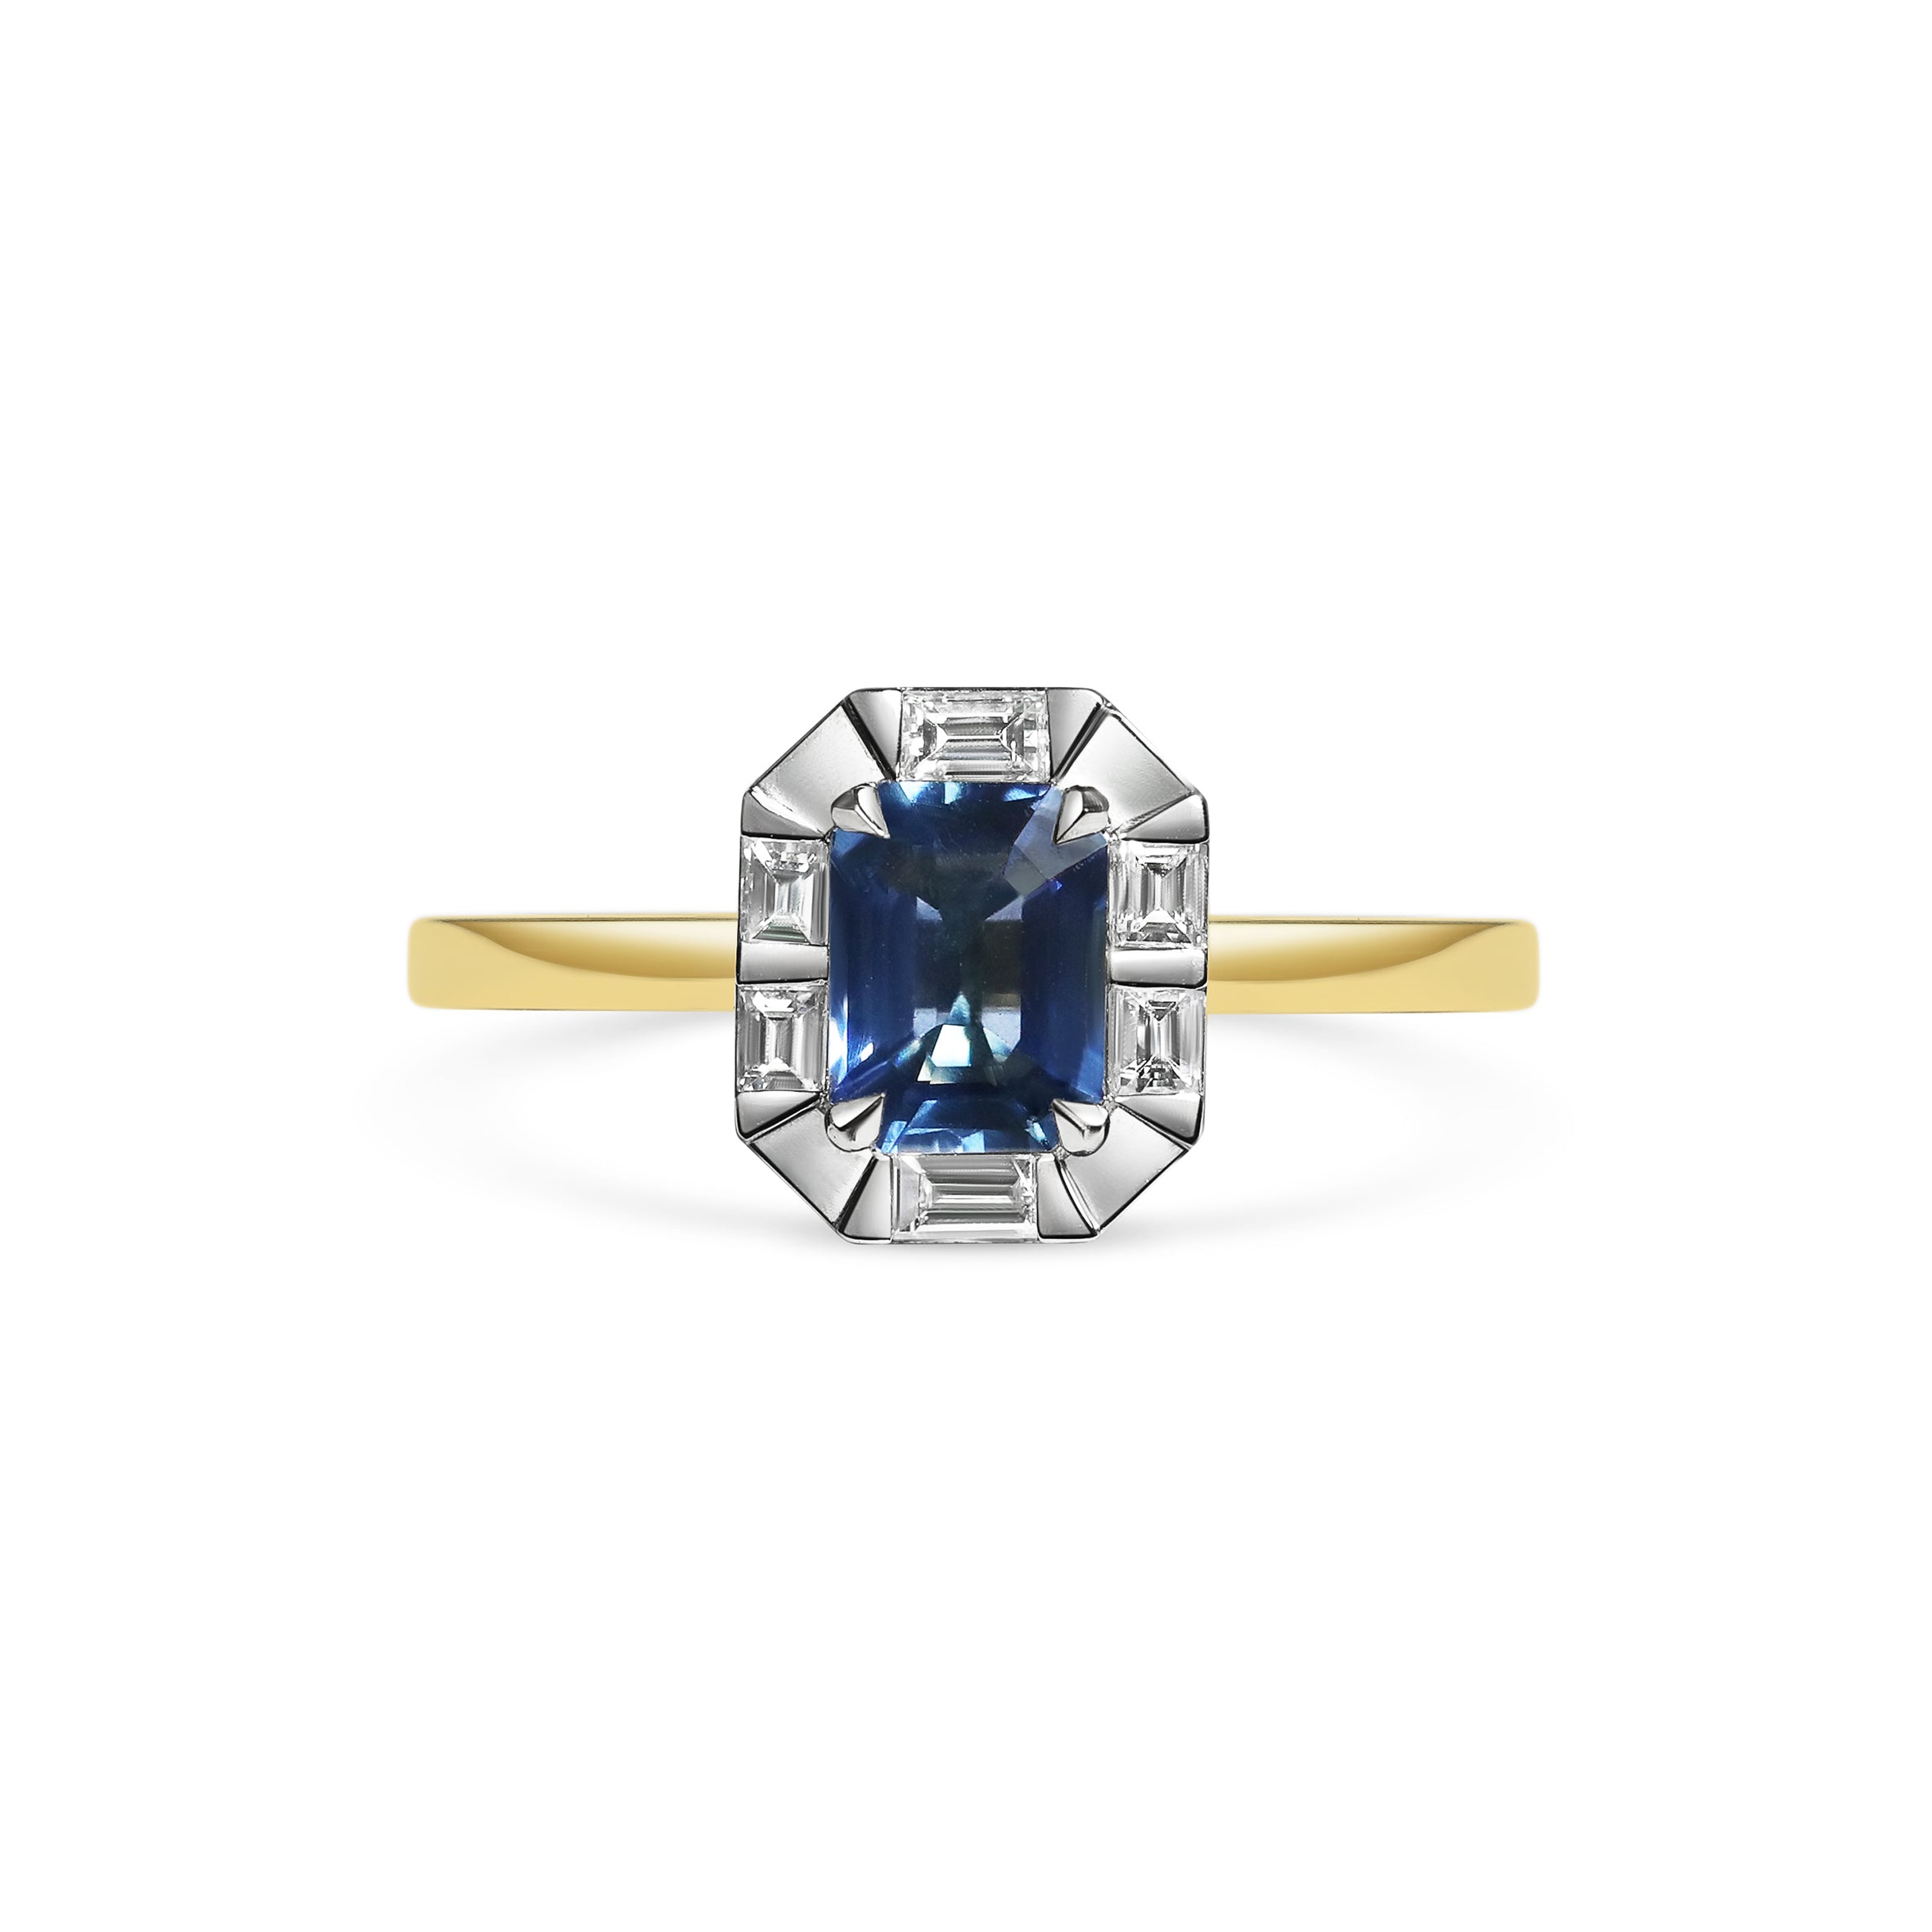 The Caqueta Ring by East London jeweller Rachel Boston | Discover our collections of unique and timeless engagement rings, wedding rings, and modern fine jewellery.